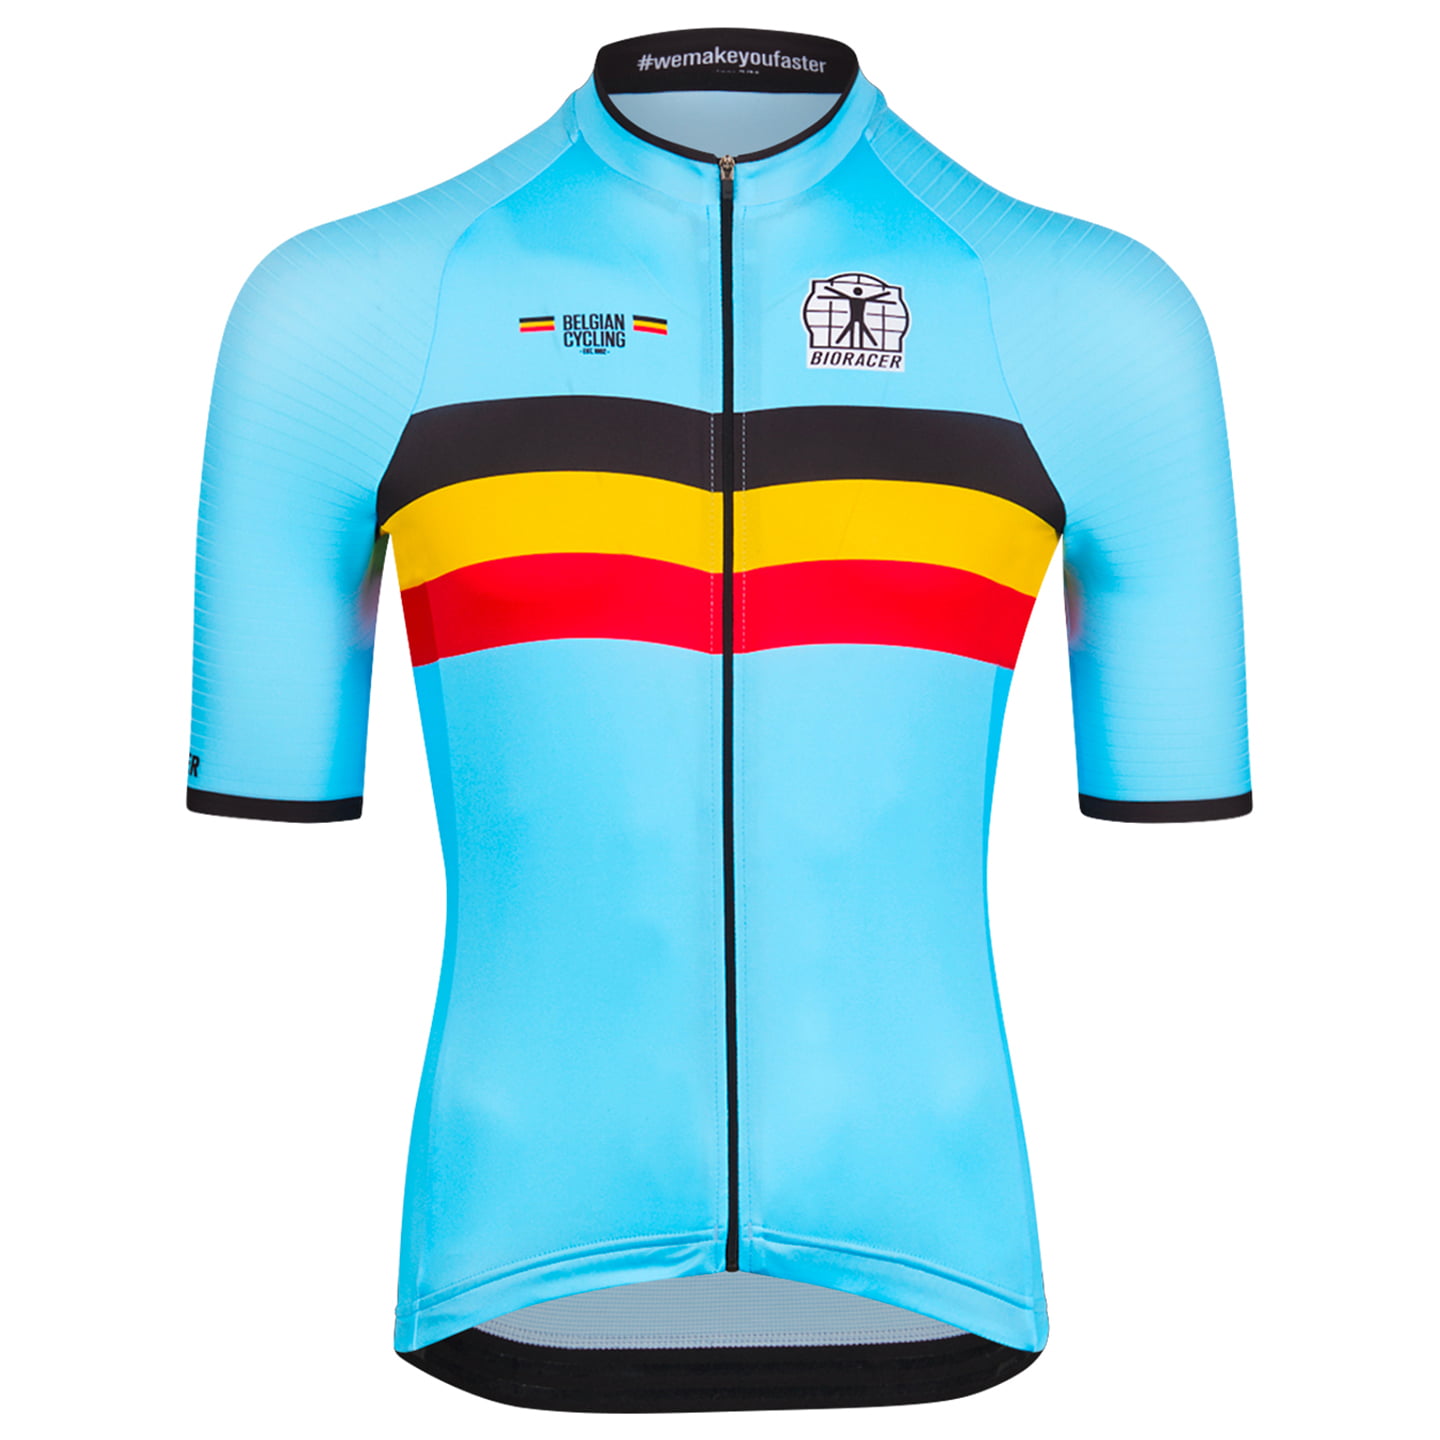 BELGIAN NATIONAL TEAM 2023 Short Sleeve Jersey, for men, size L, Cycling shirt, Cycle clothing